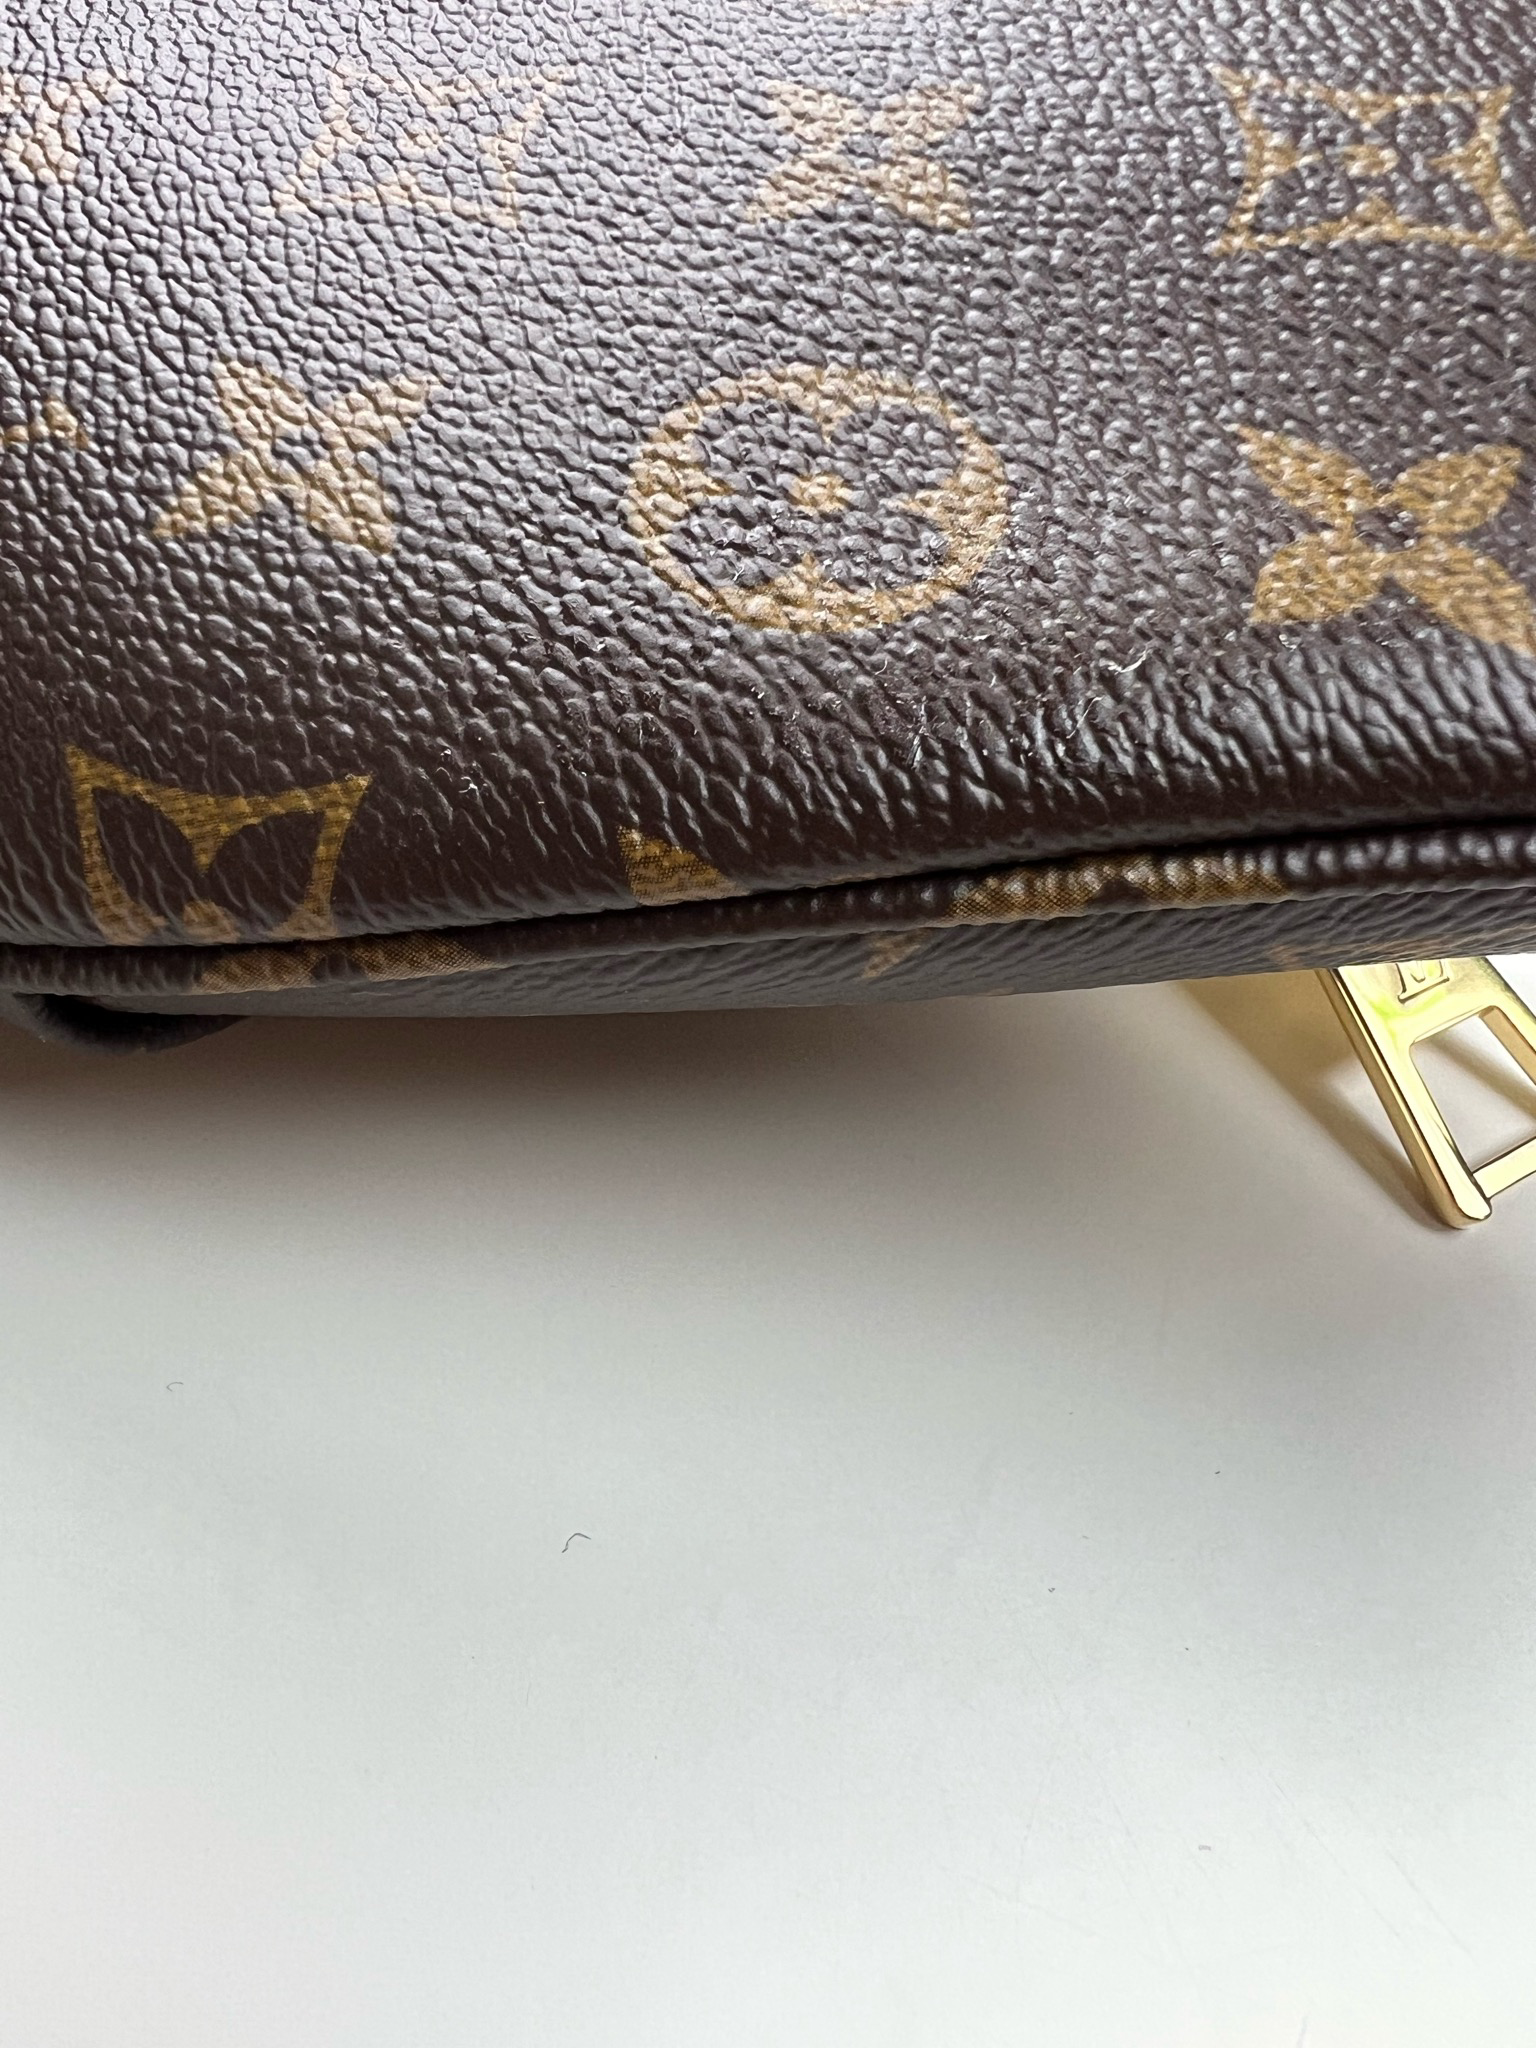 Louis Vuitton Heart bag Limited Edition, Monogram, New with Dustbag - Julia  Rose Boston